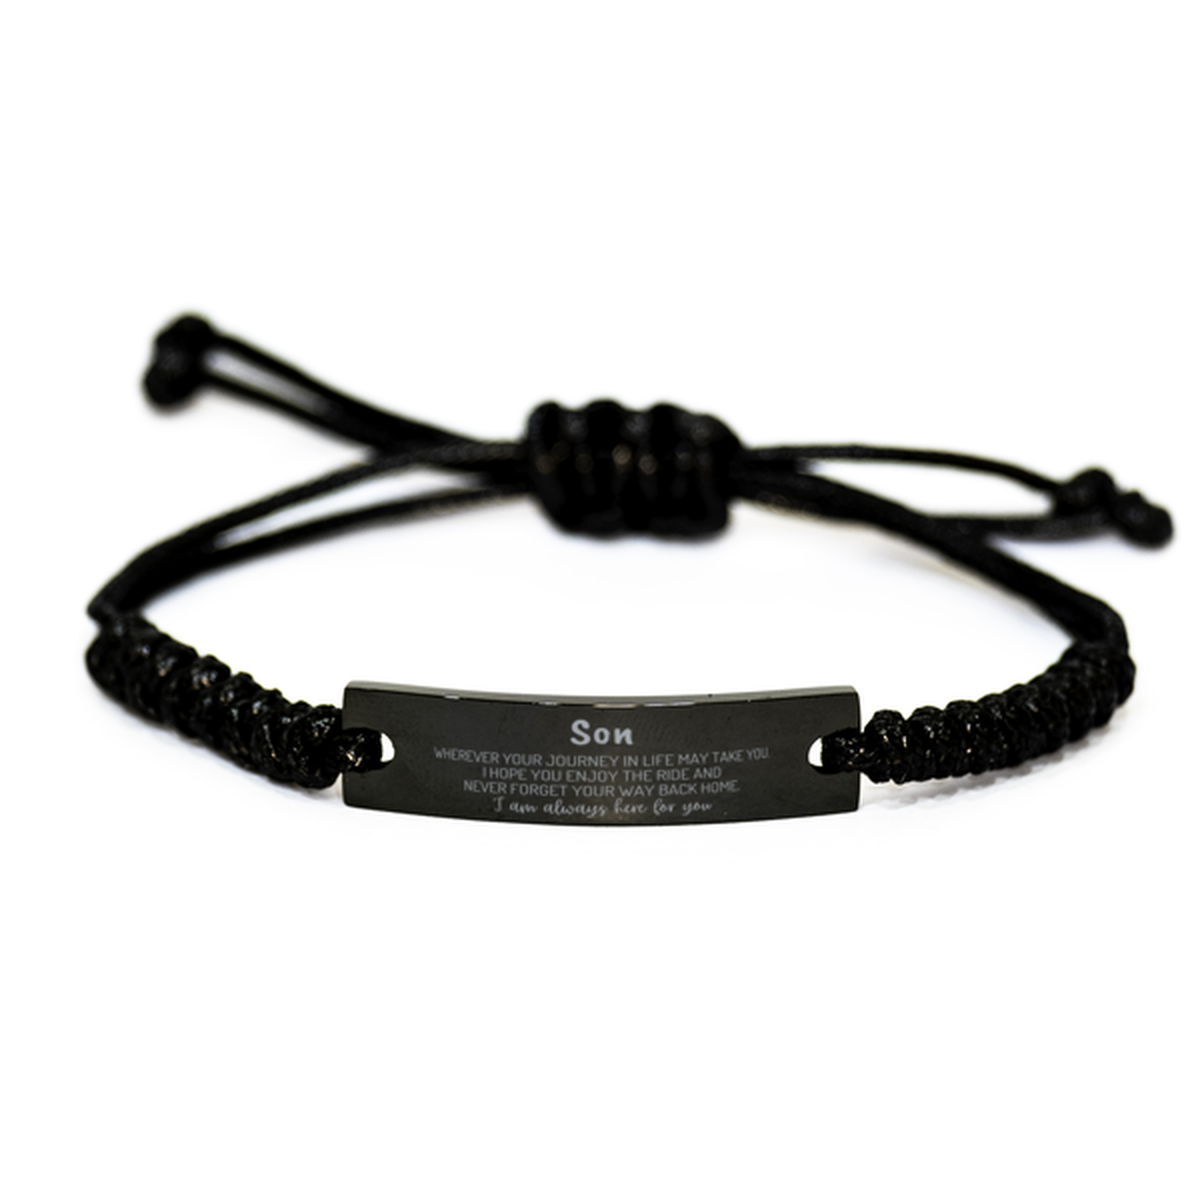 Son wherever your journey in life may take you, I am always here for you Son Black Rope Bracelet, Awesome Christmas Gifts For Son, Son Birthday Gifts for Men Women Family Loved One